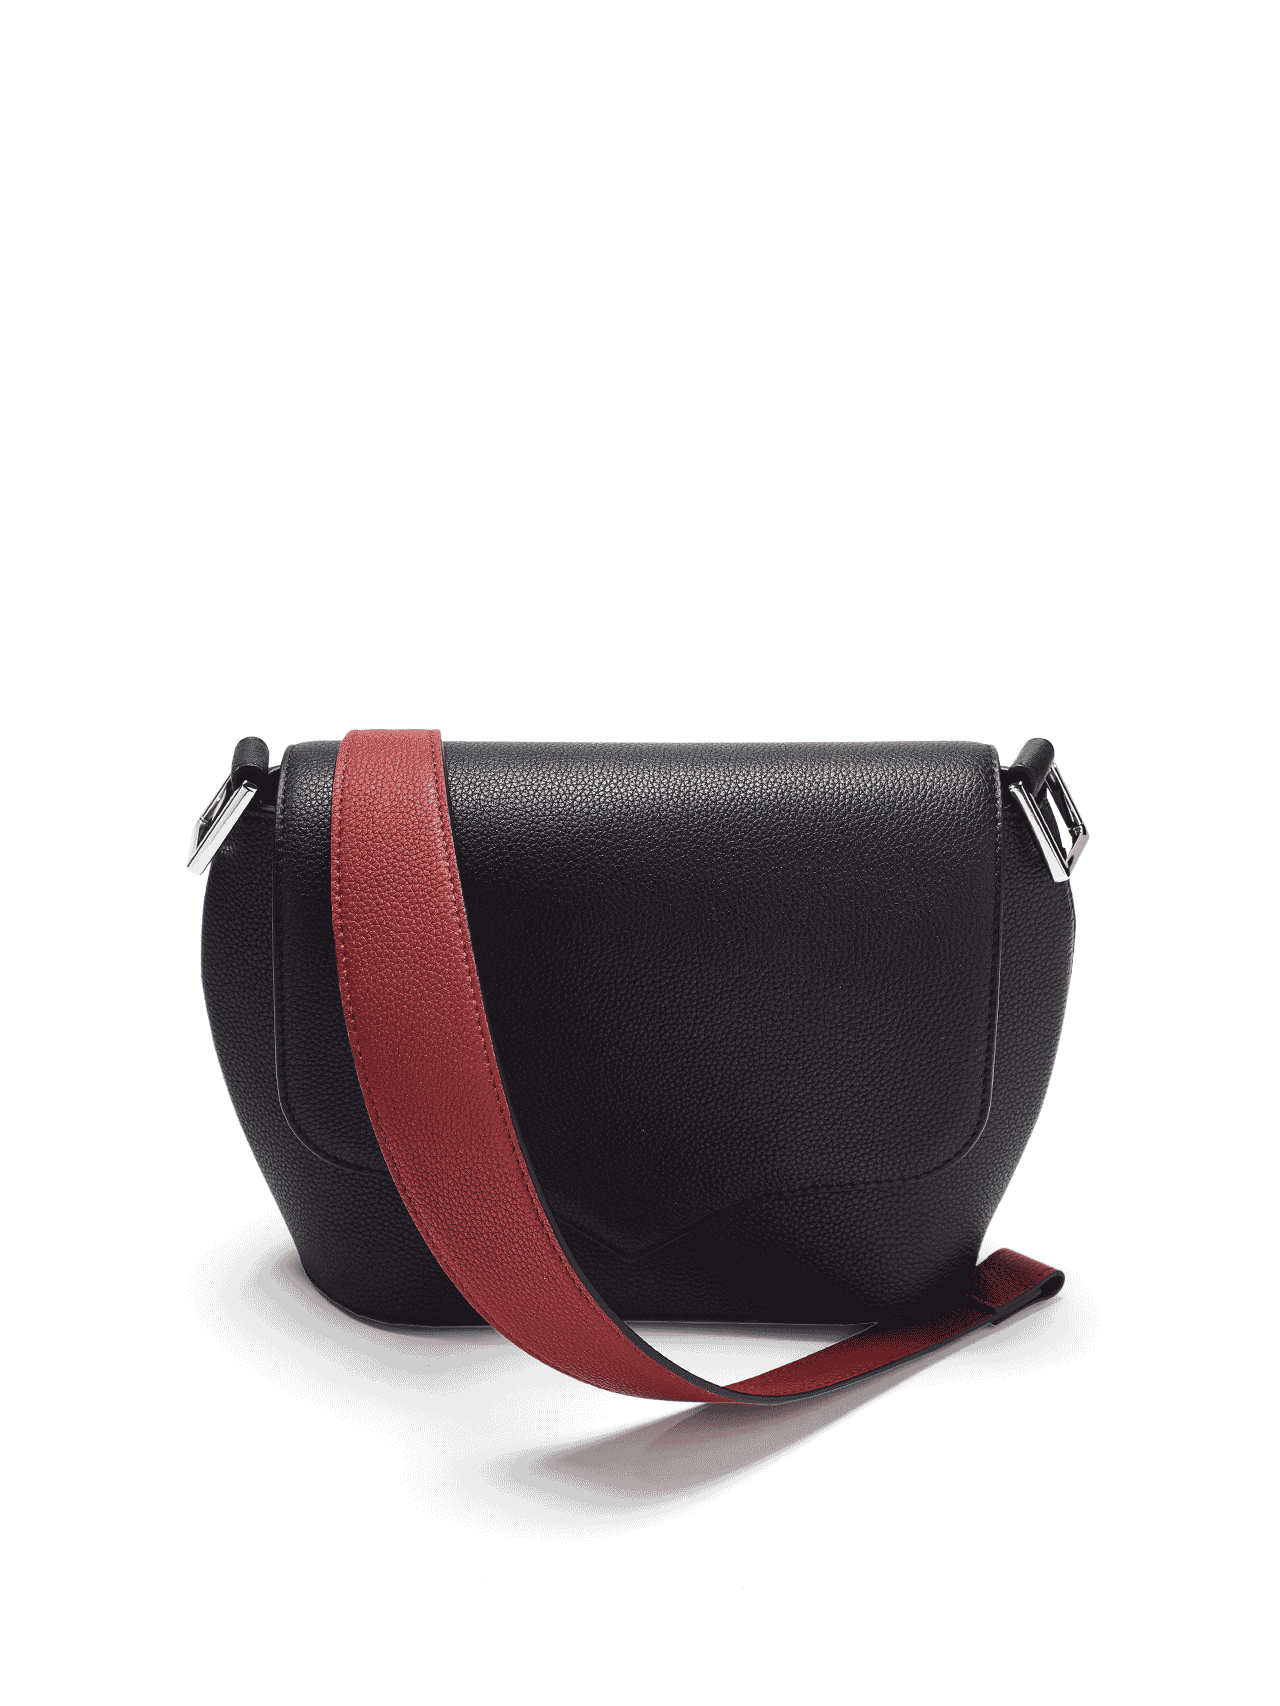 bag leather jean rousseau black red